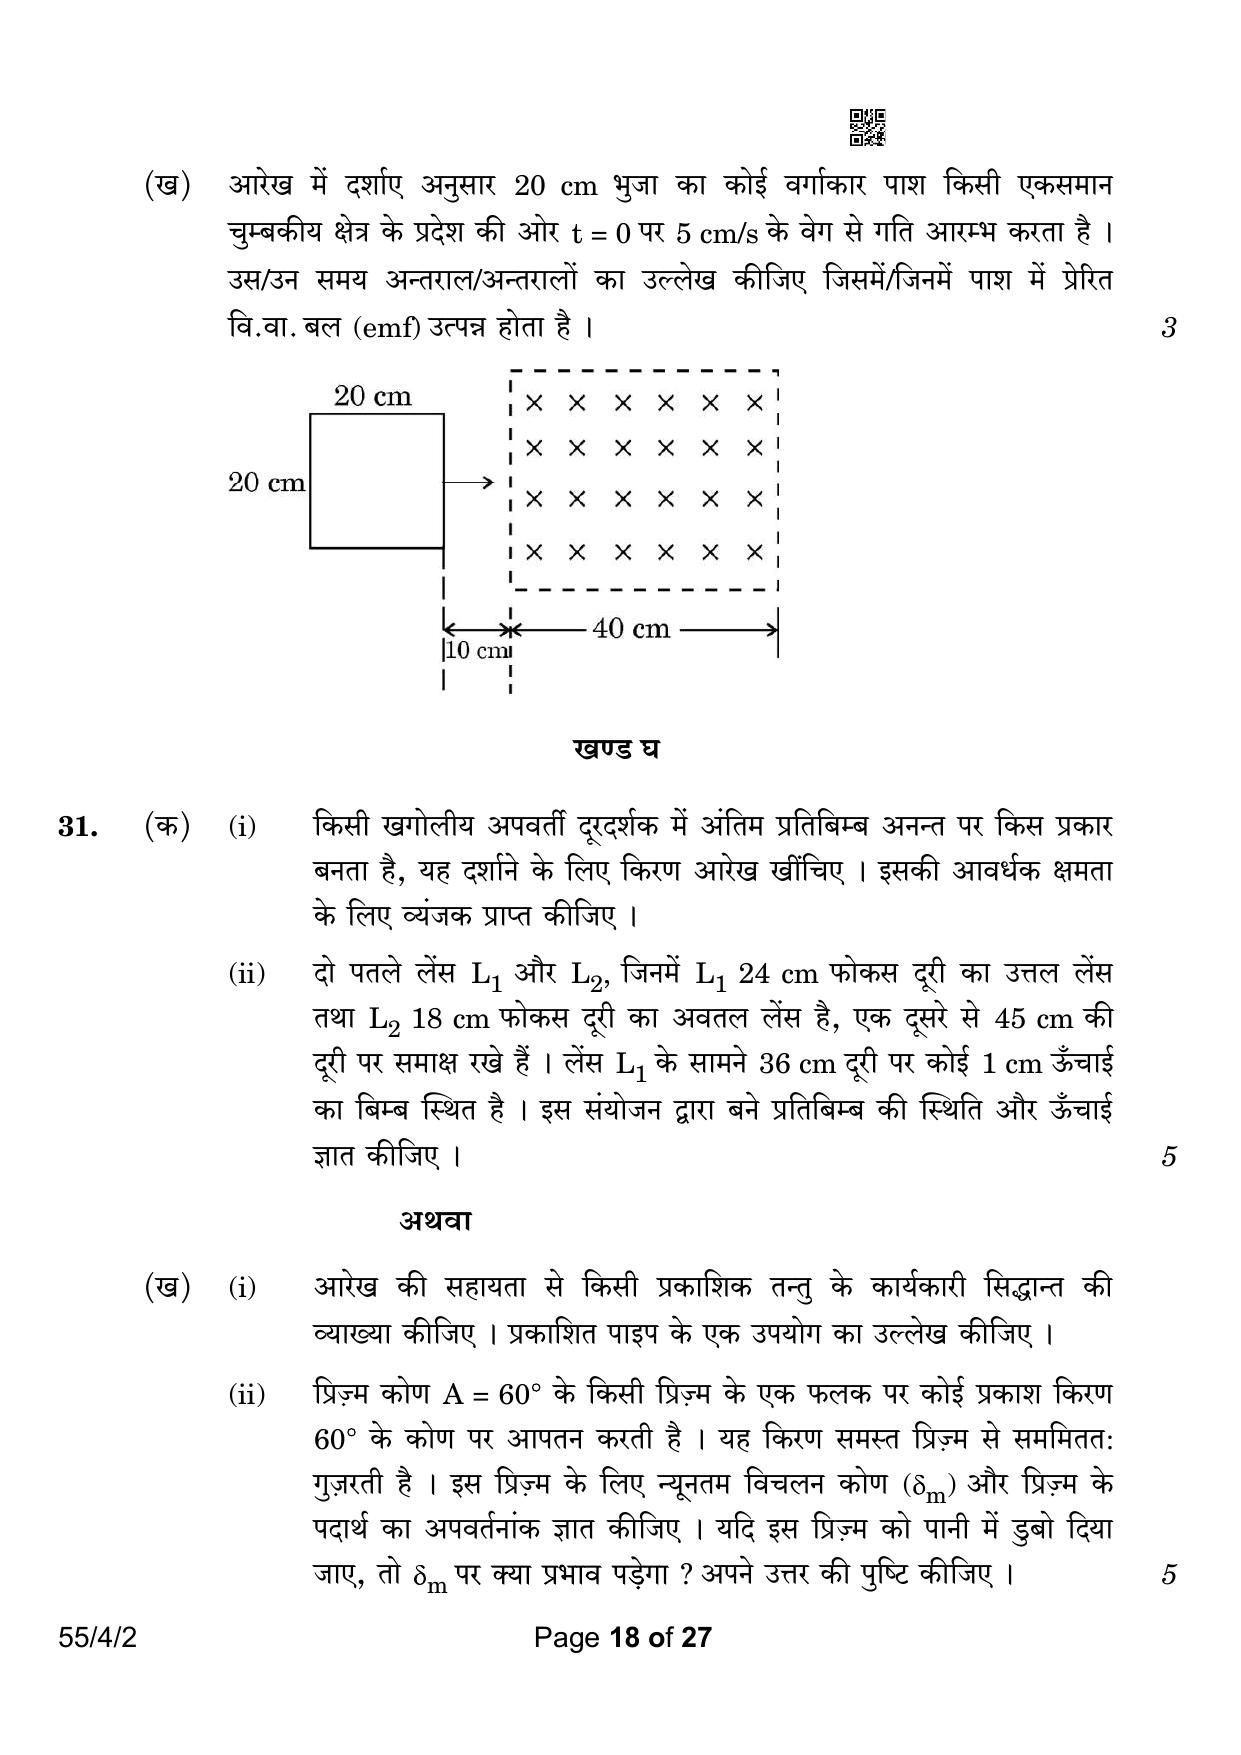 CBSE Class 12 55-4-2 Physics 2023 Question Paper - Page 18